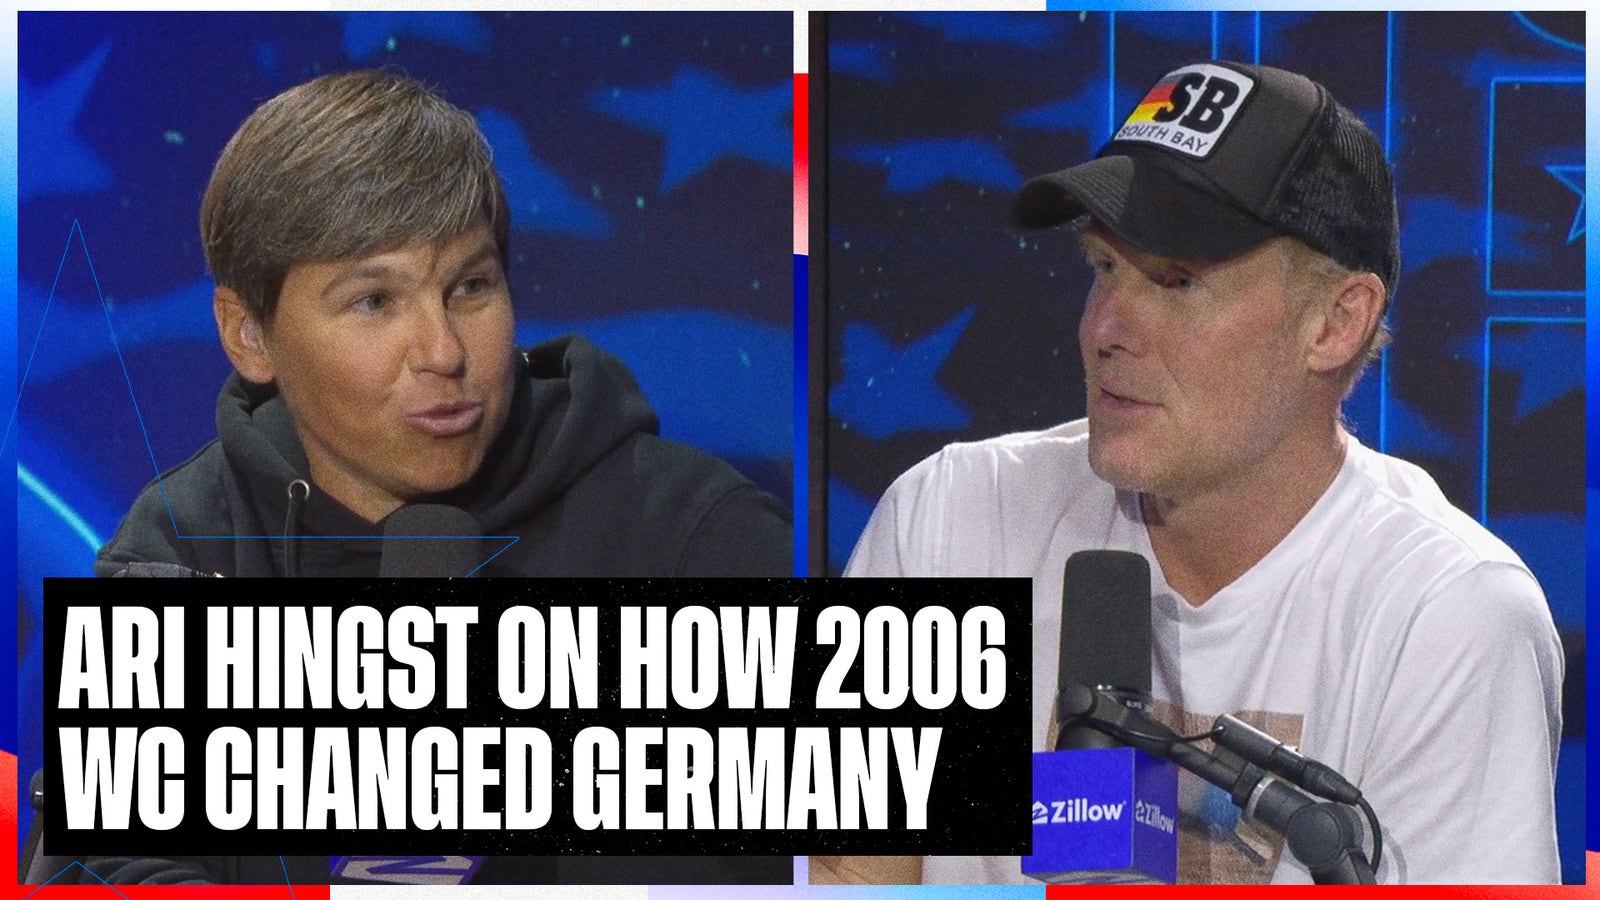 Ari Hingst on how the 2006 World Cup changed Germany